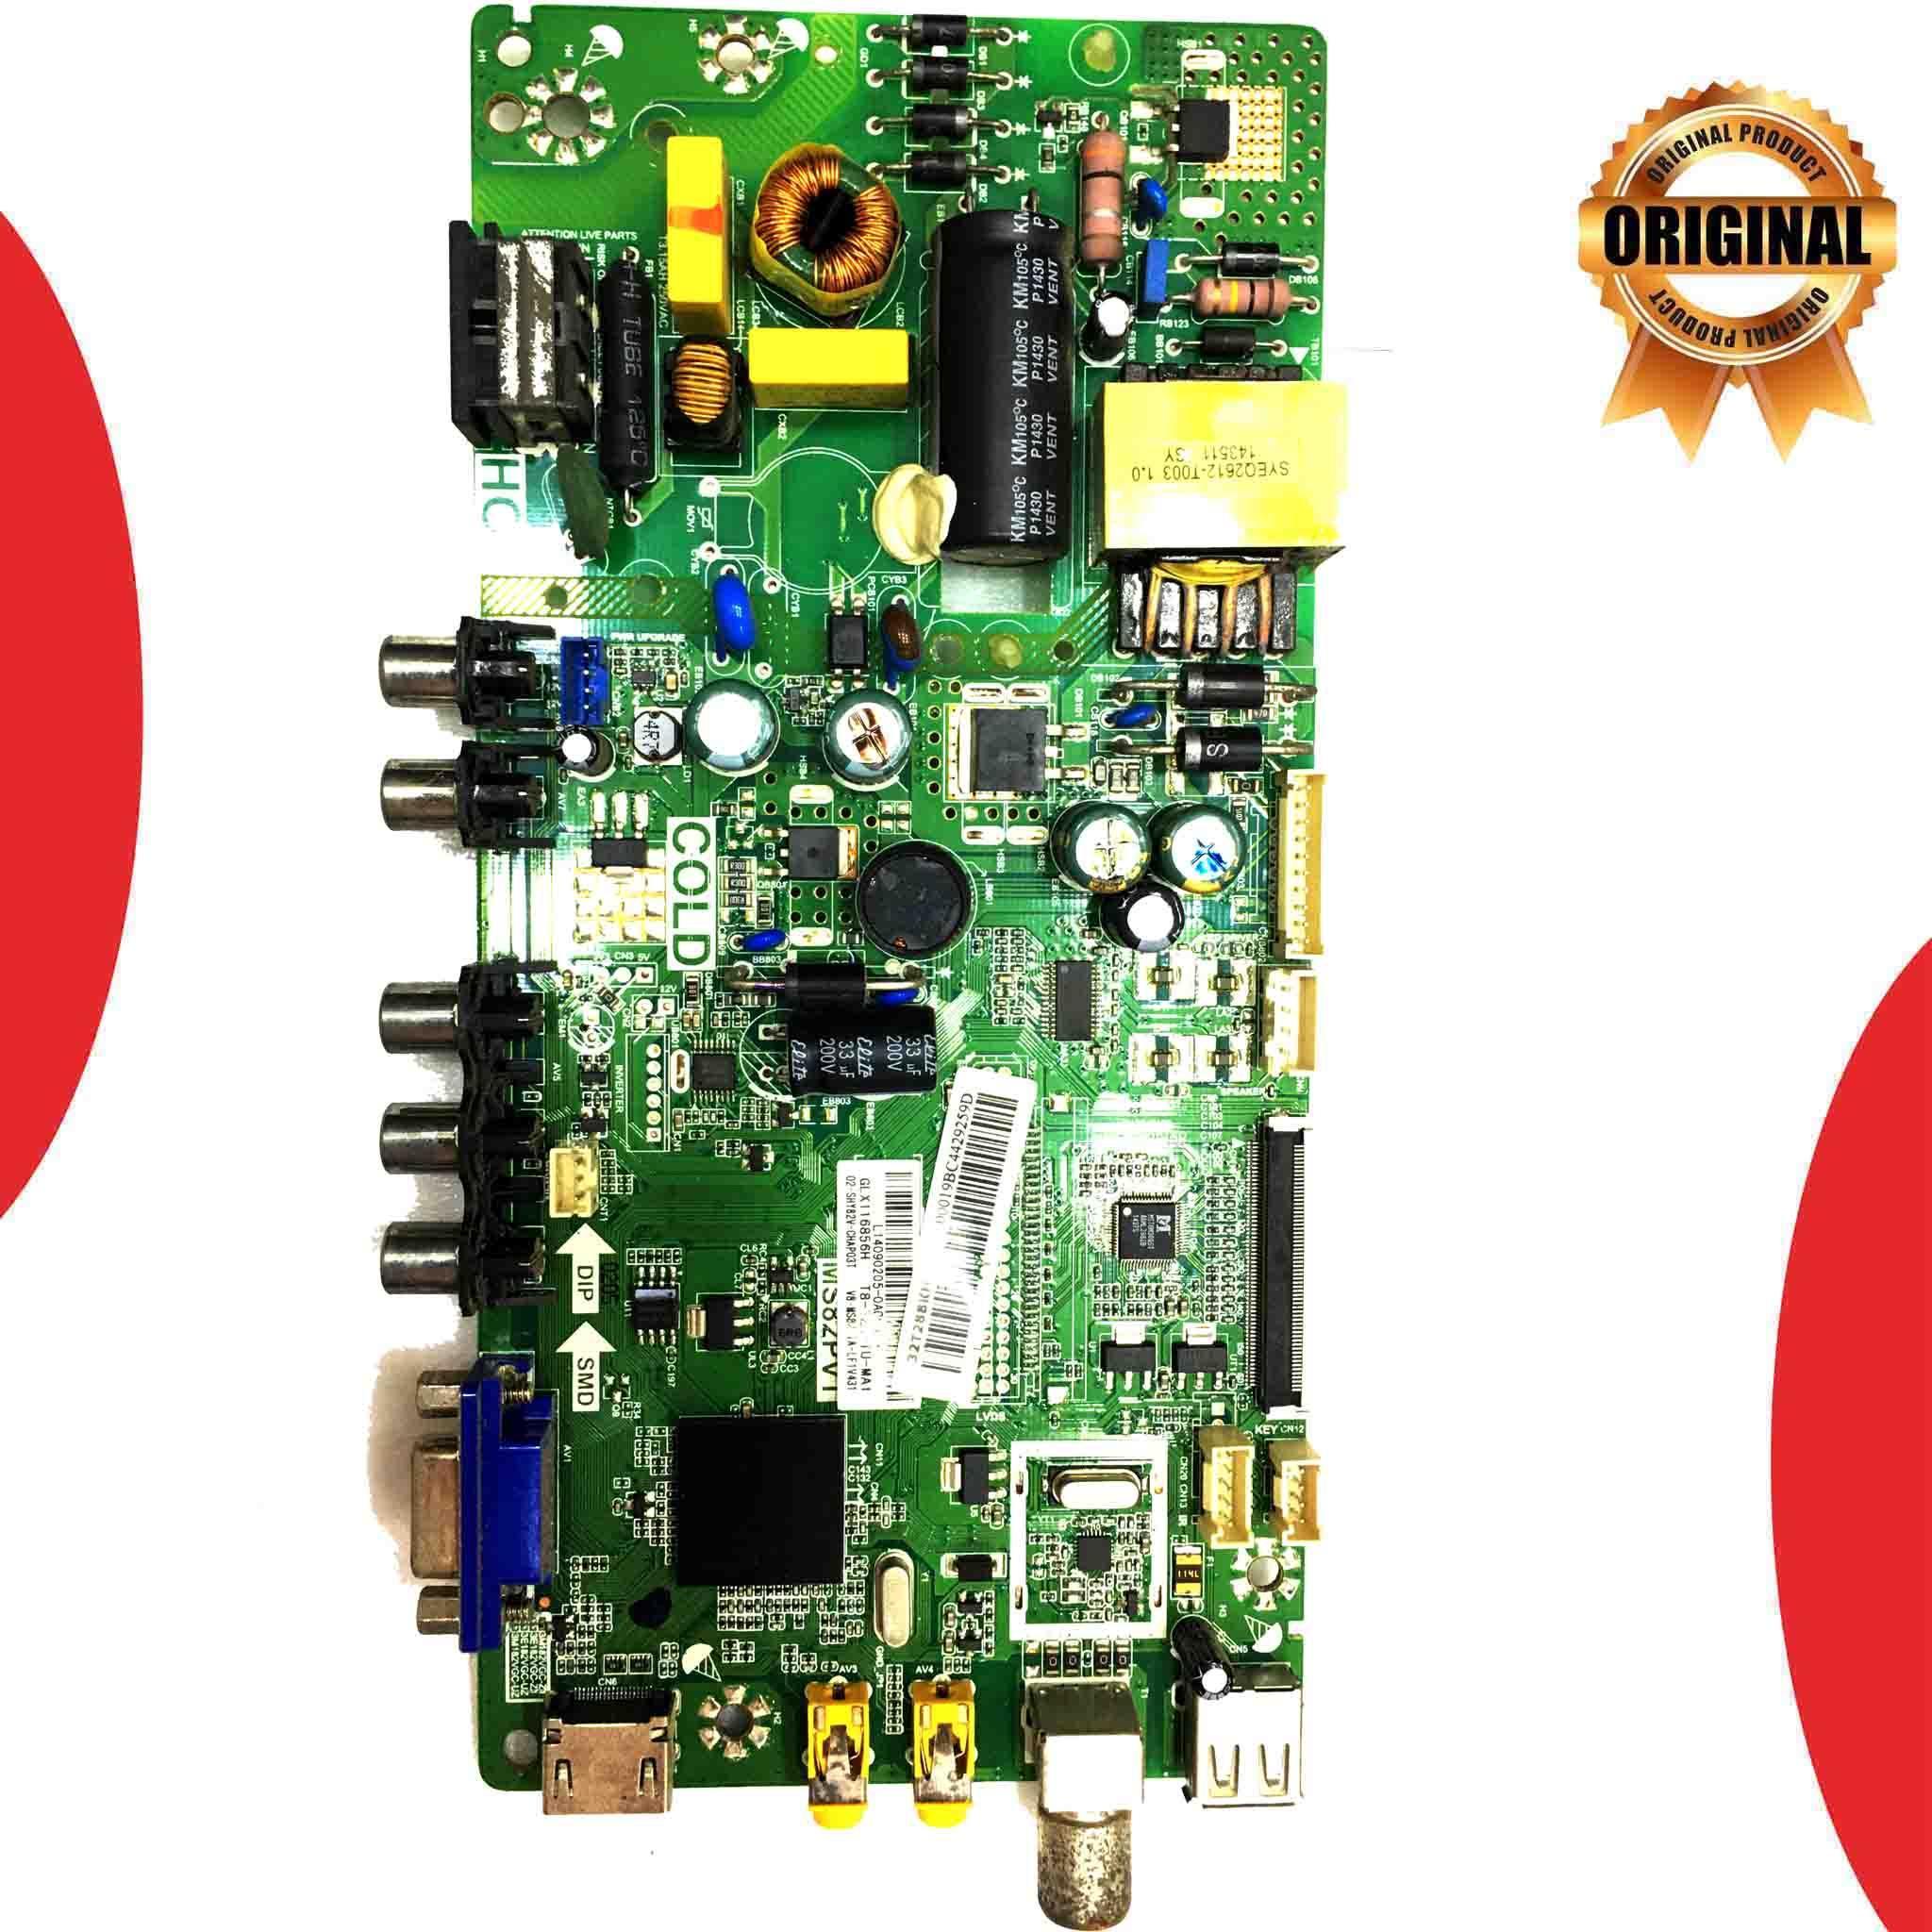 Micromax 32 inch LED TV Motherboard for Model 32T28BKHD - Great Bharat Electronics